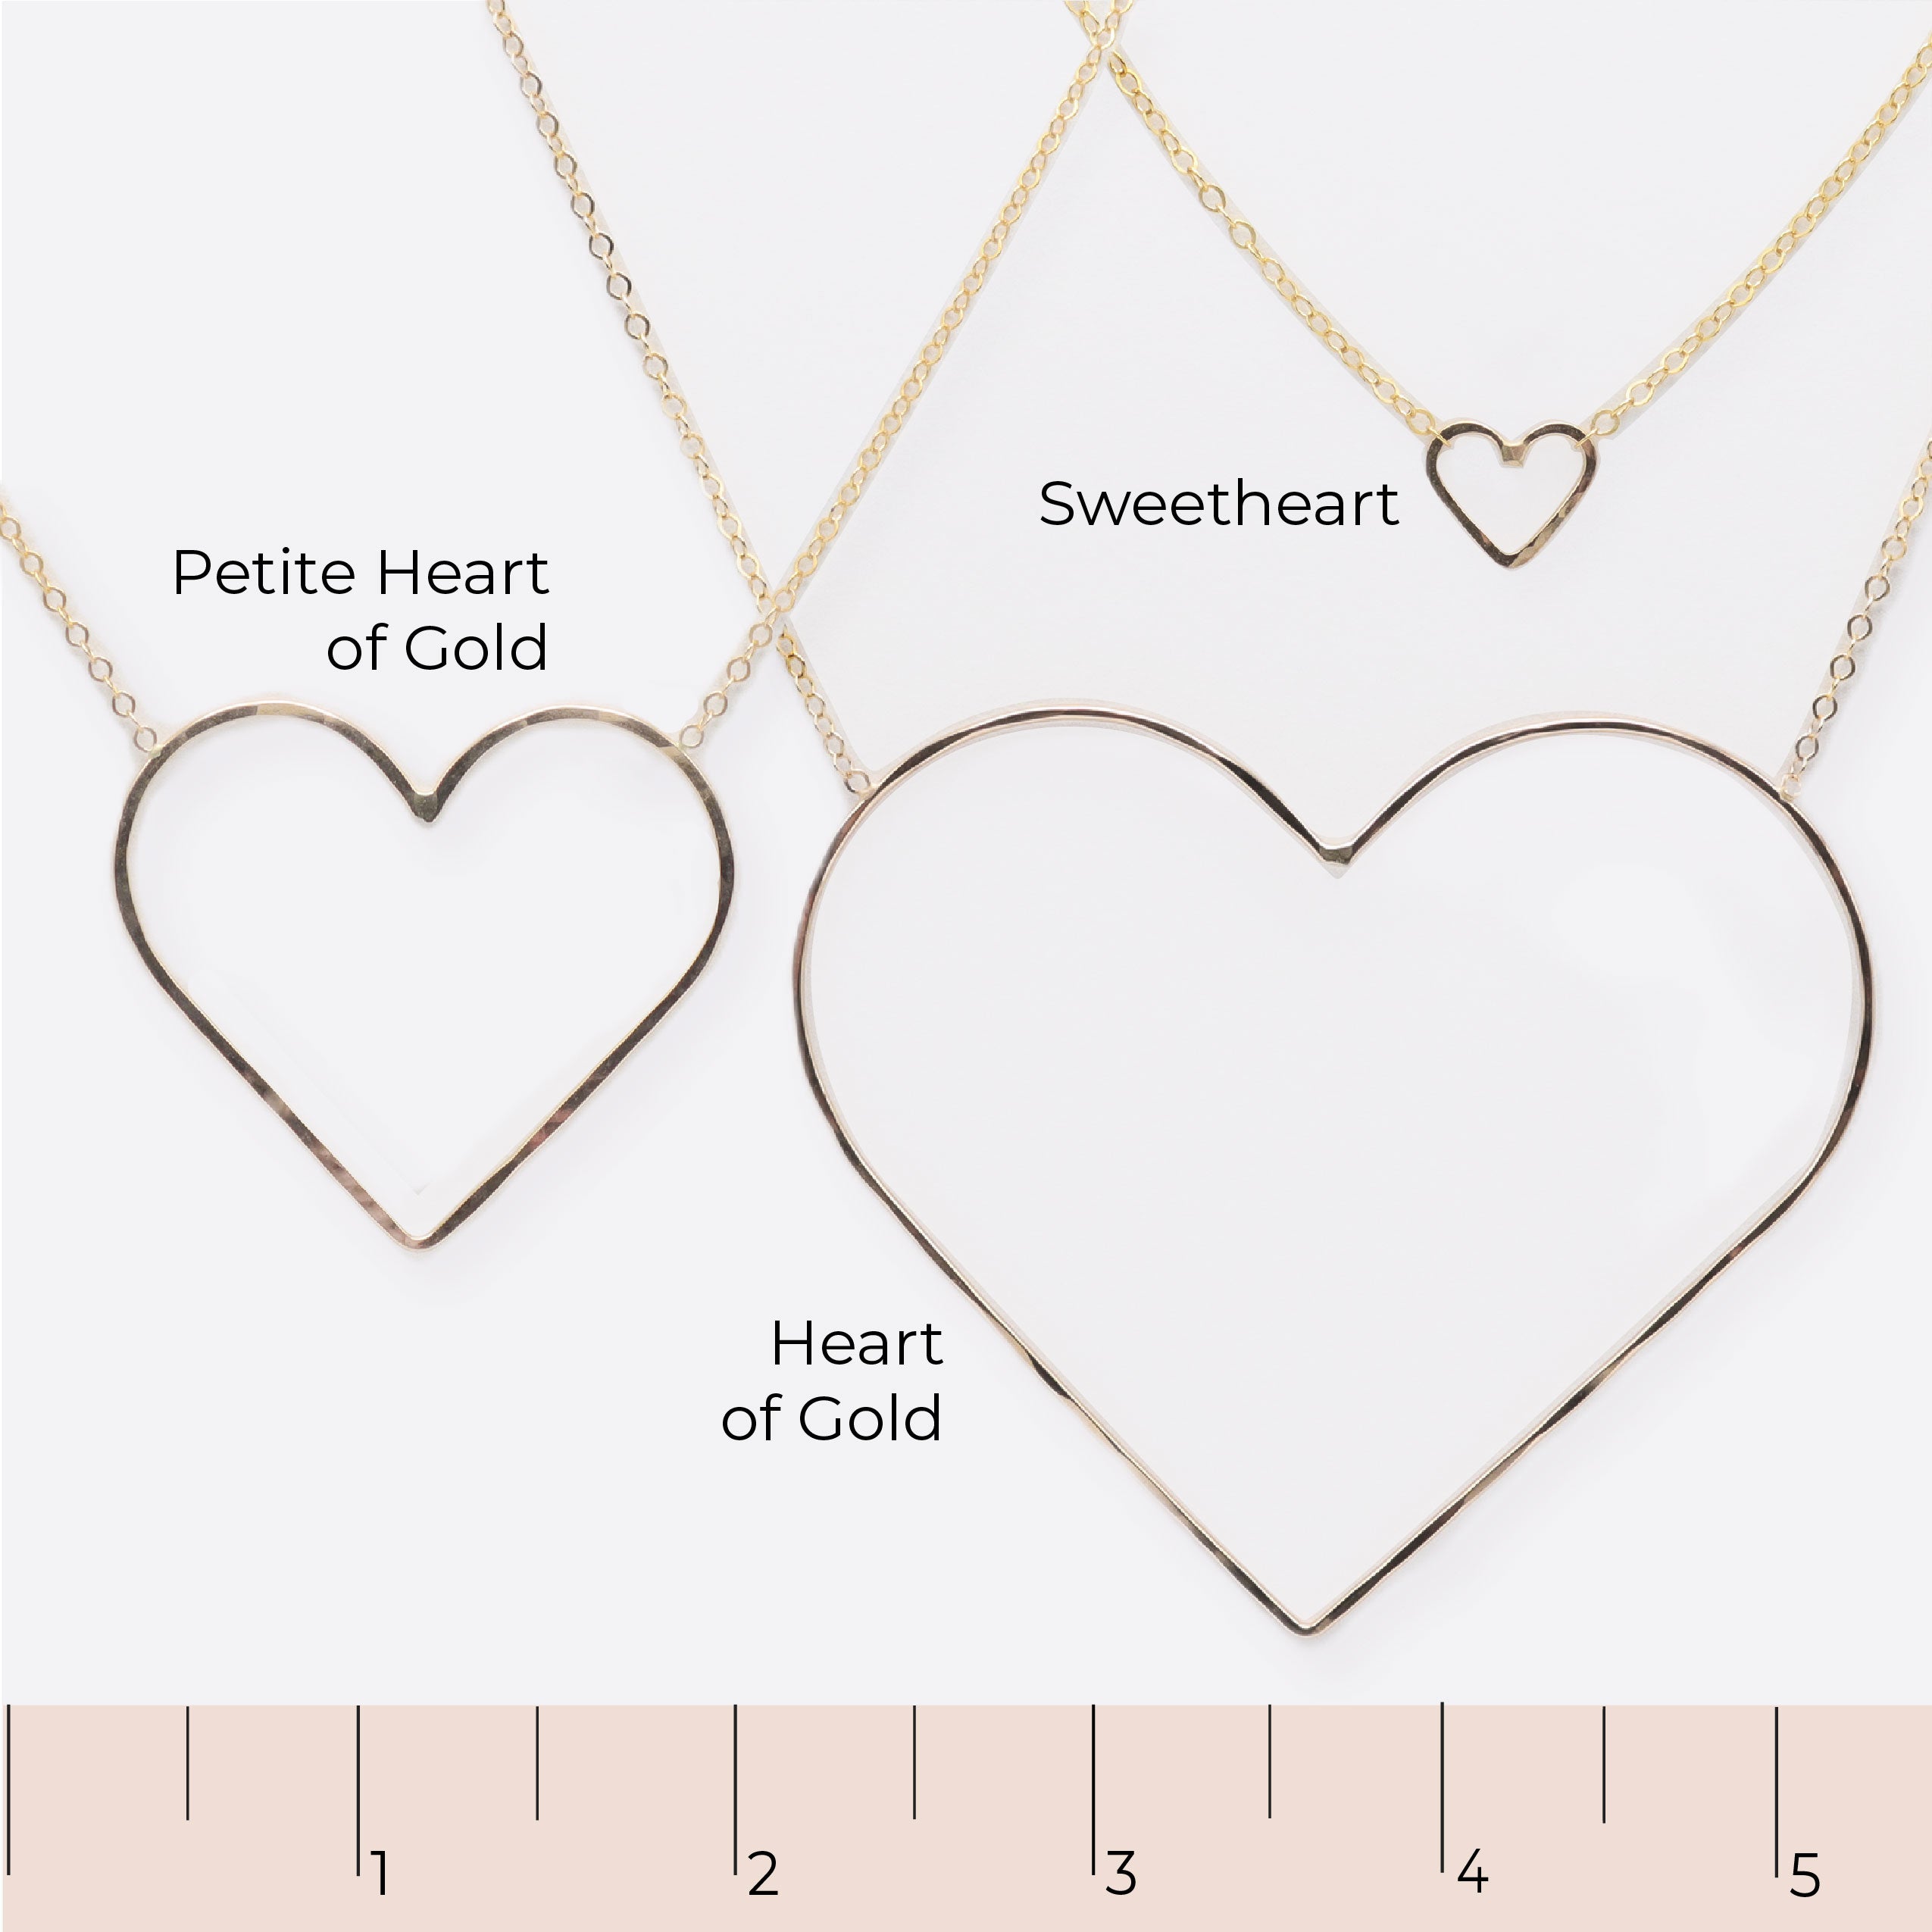 Heart Necklaces Size Guide